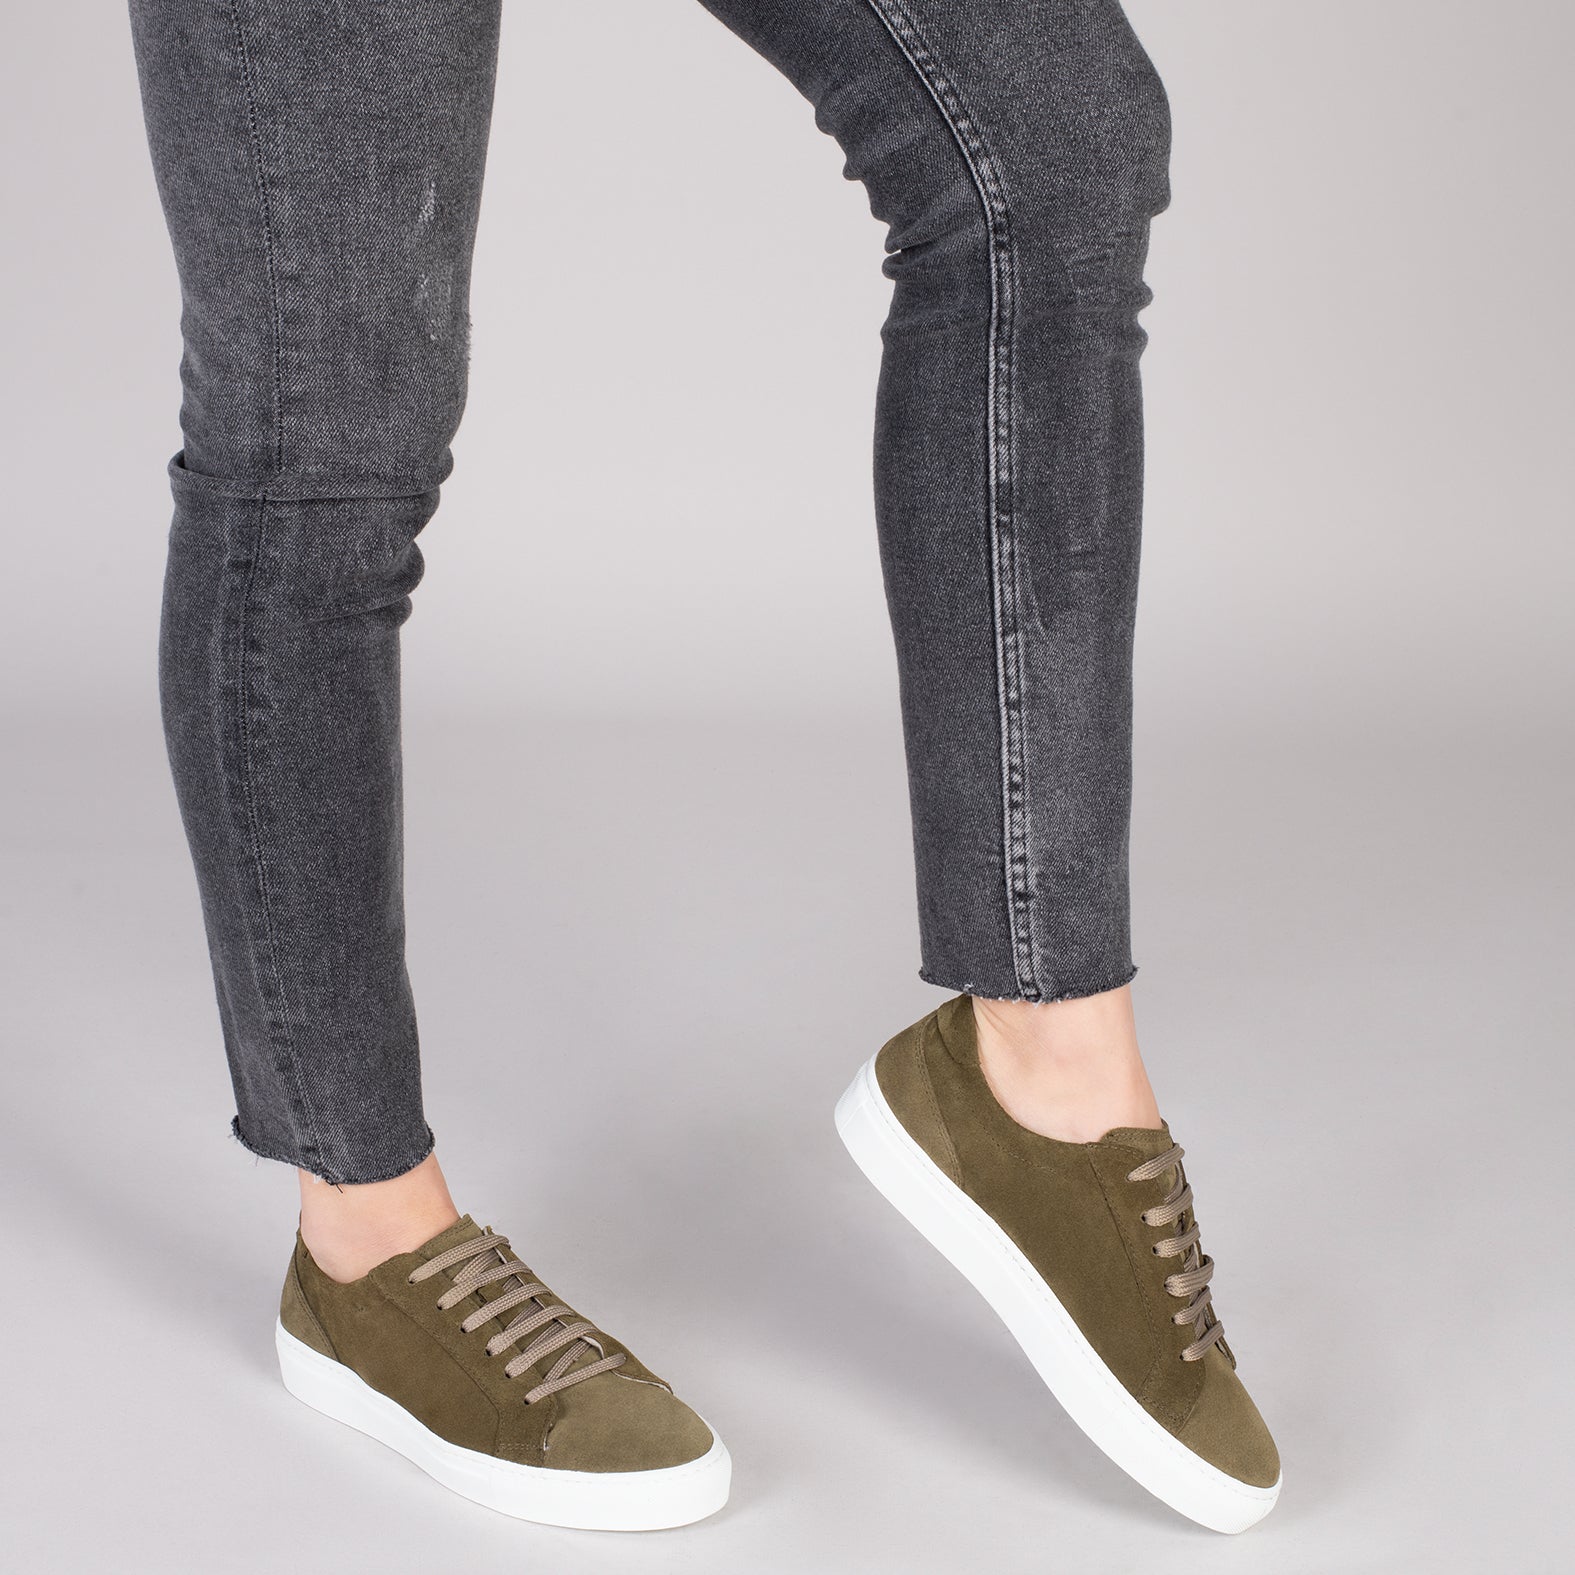 ENJOY – GREEN suede lifestyle sneakers